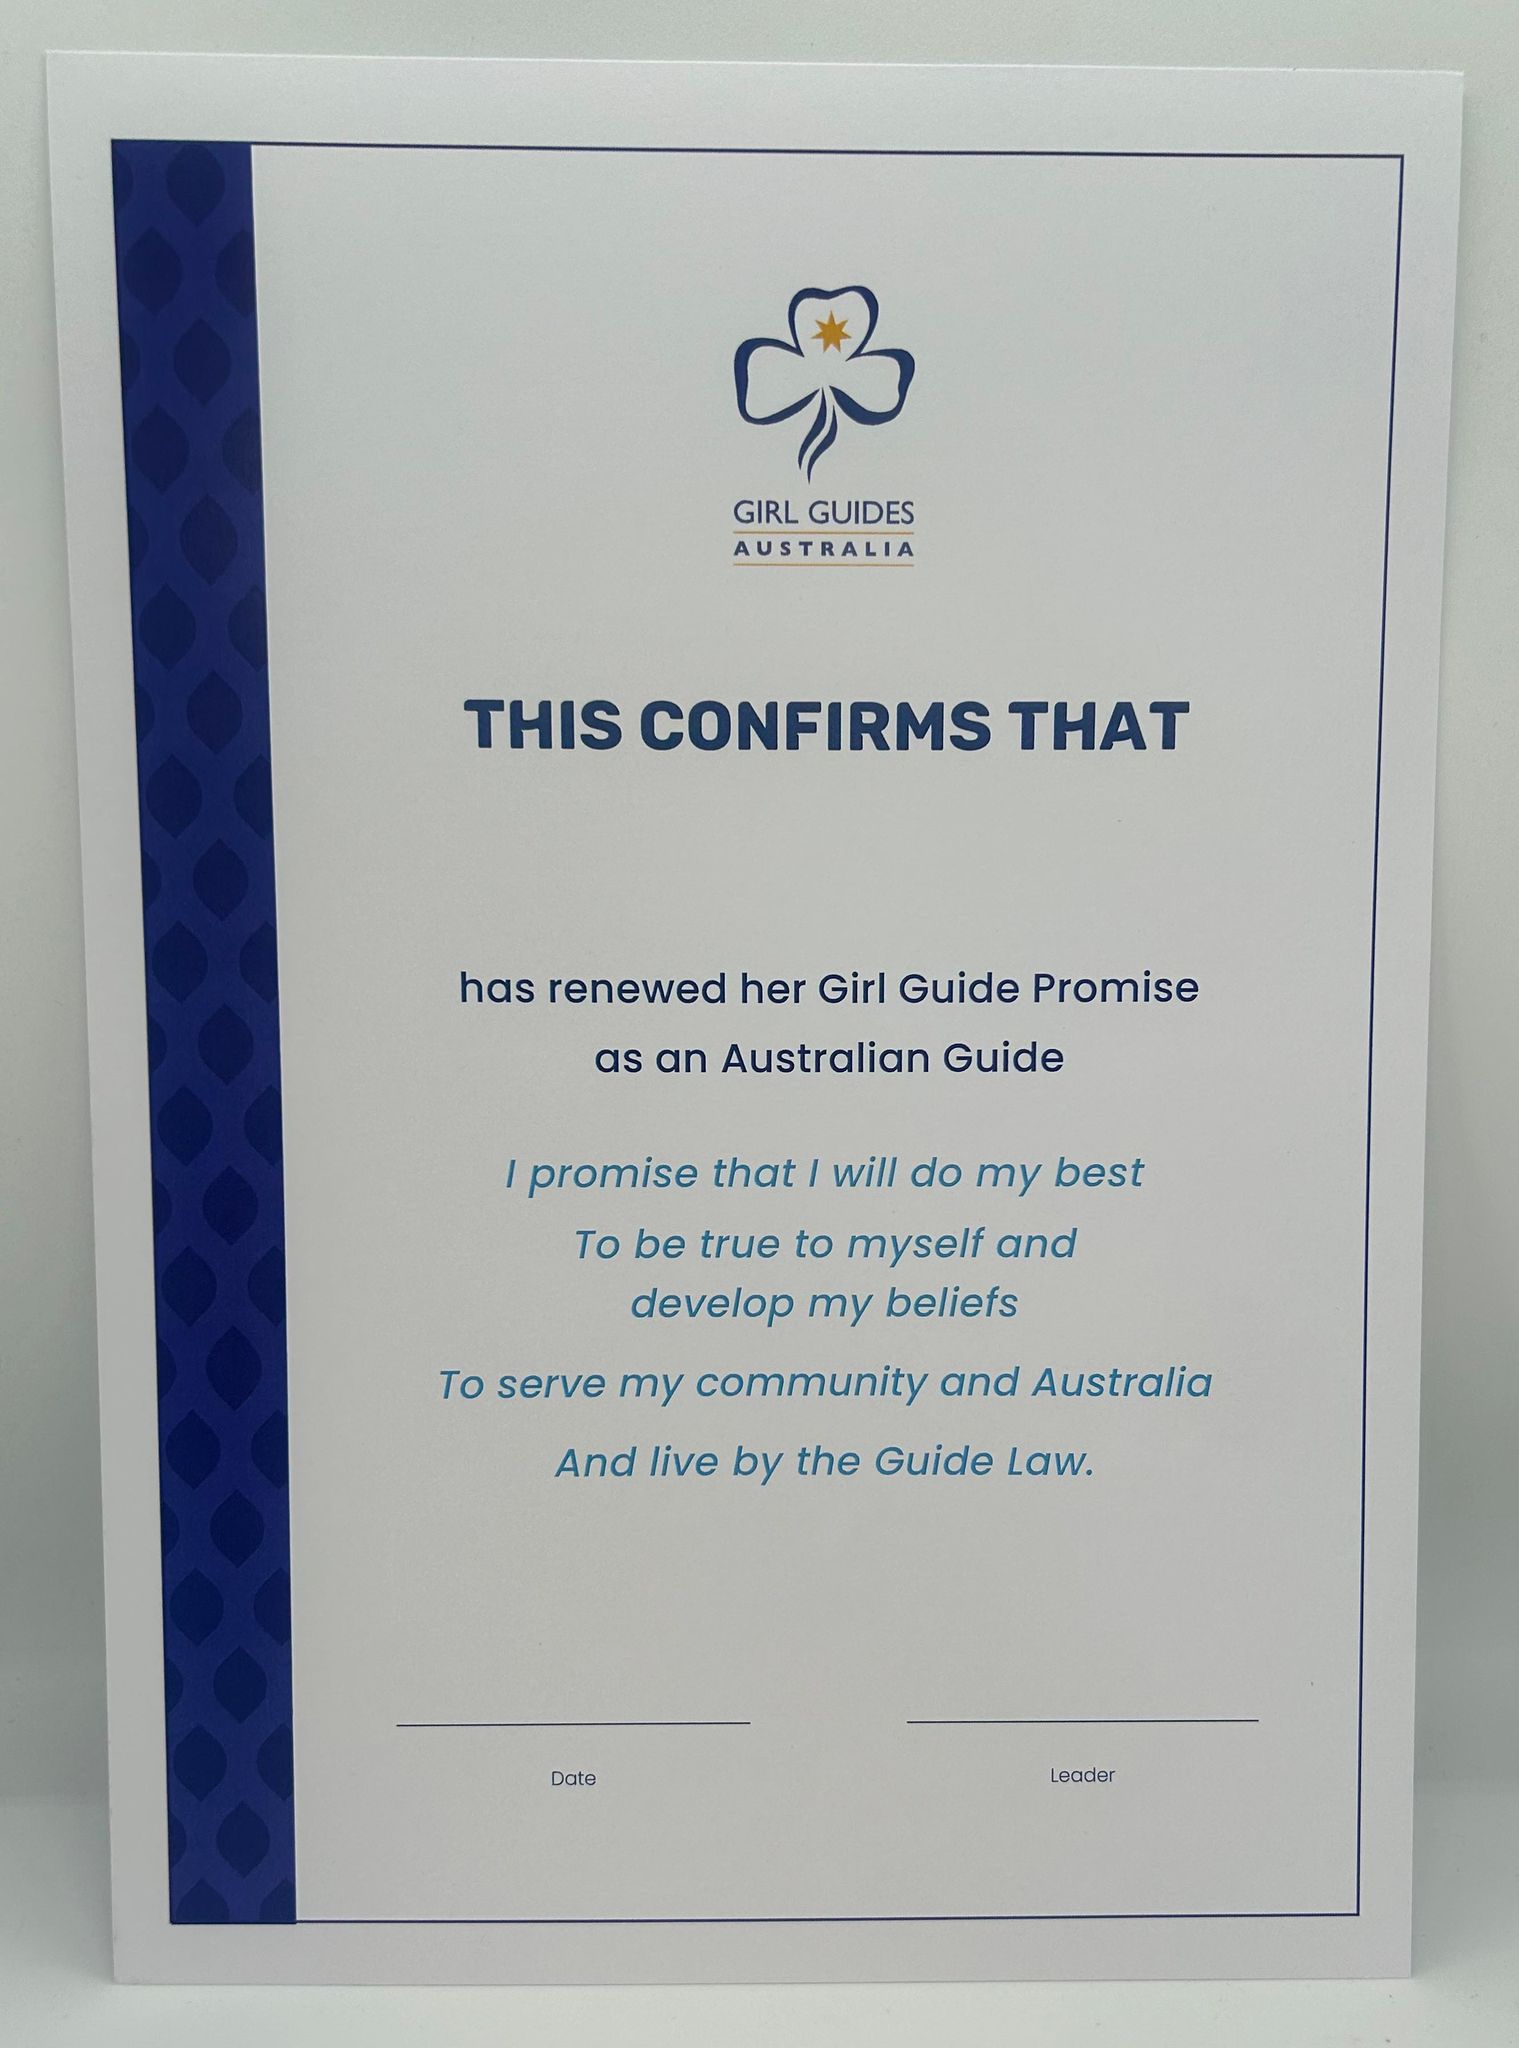 an A4 certificate that is given when someone renews their promise